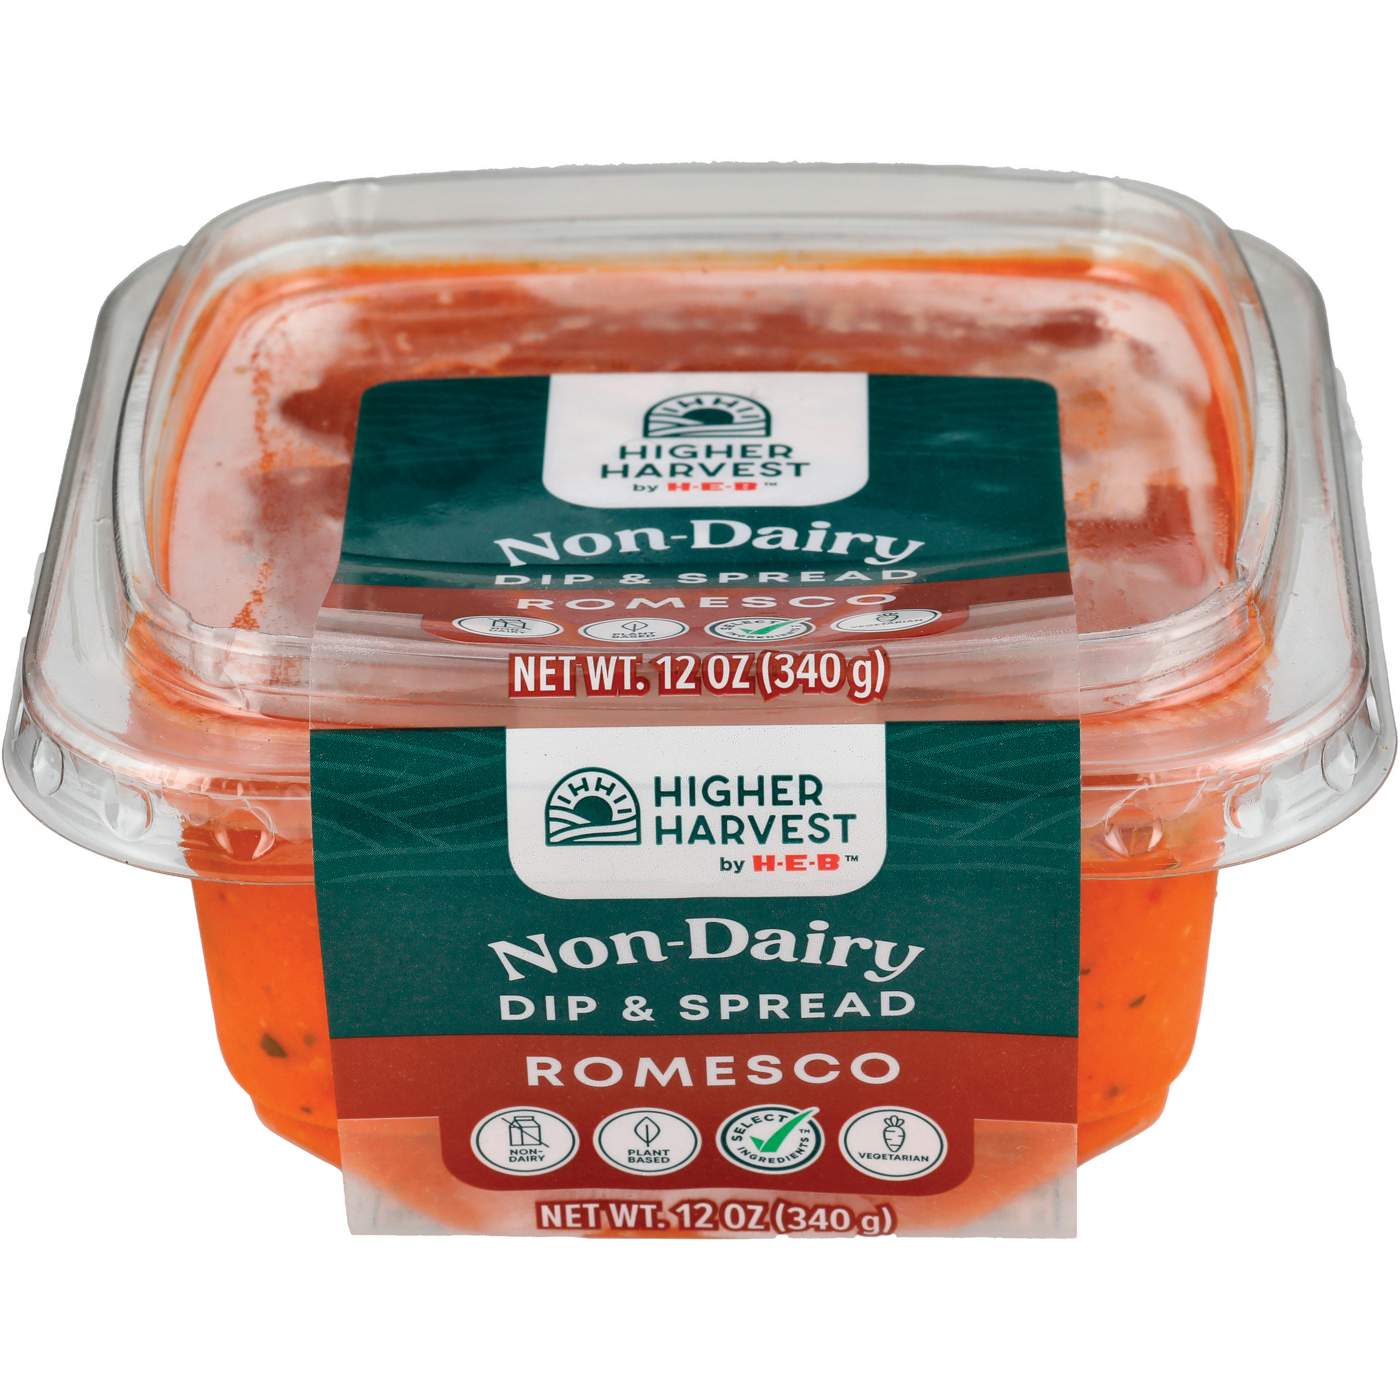 Higher Harvest by H-E-B Non-Dairy Dip & Spread - Romesco; image 3 of 3